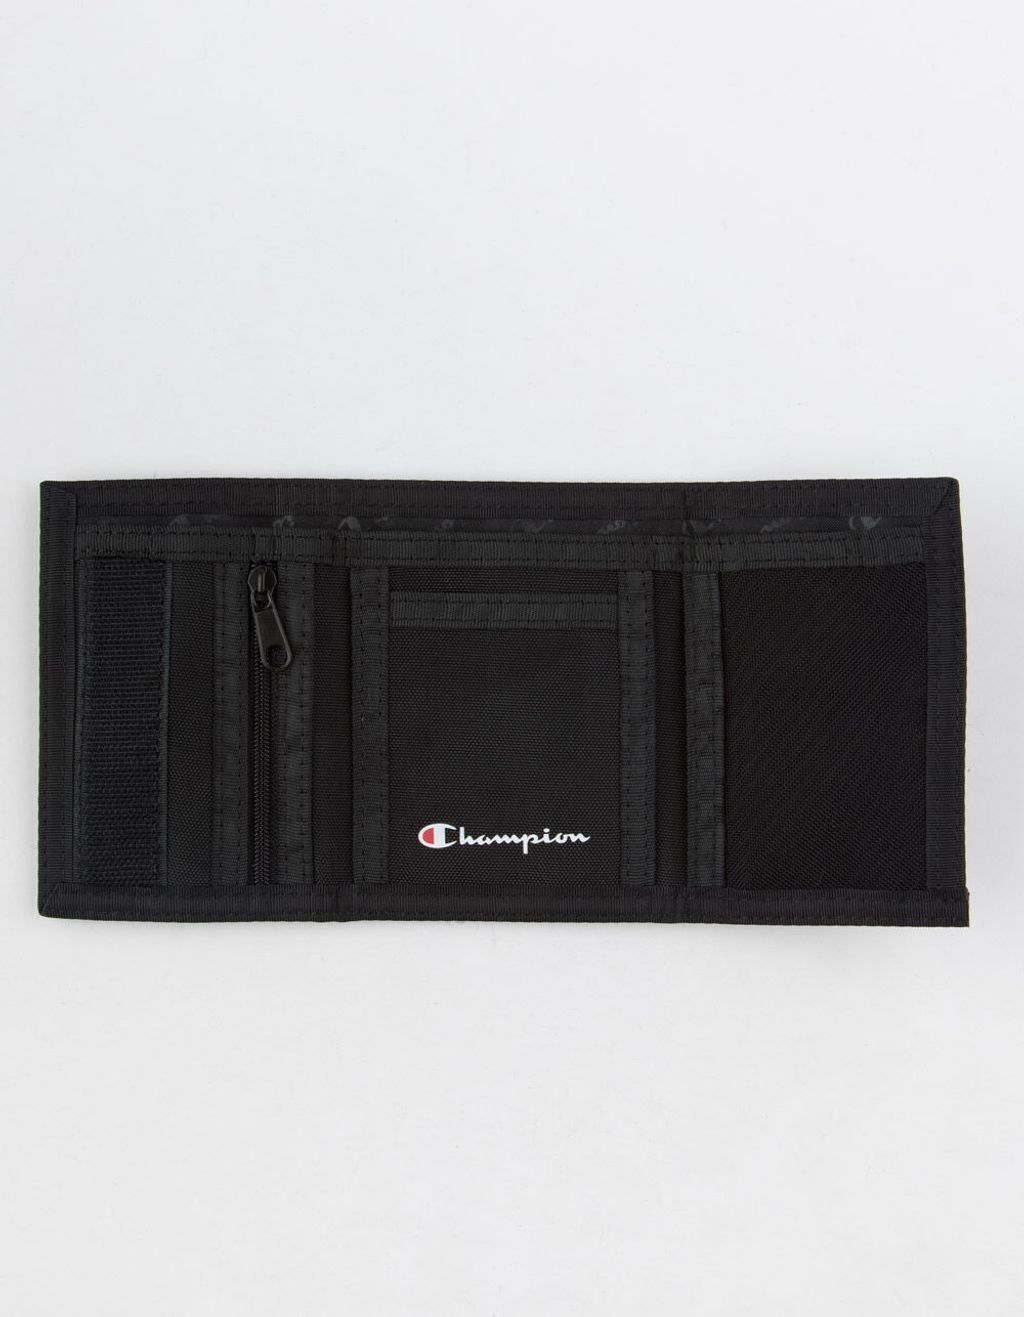 CHAMPION Trifold Wallet $25 to $10+tax 3